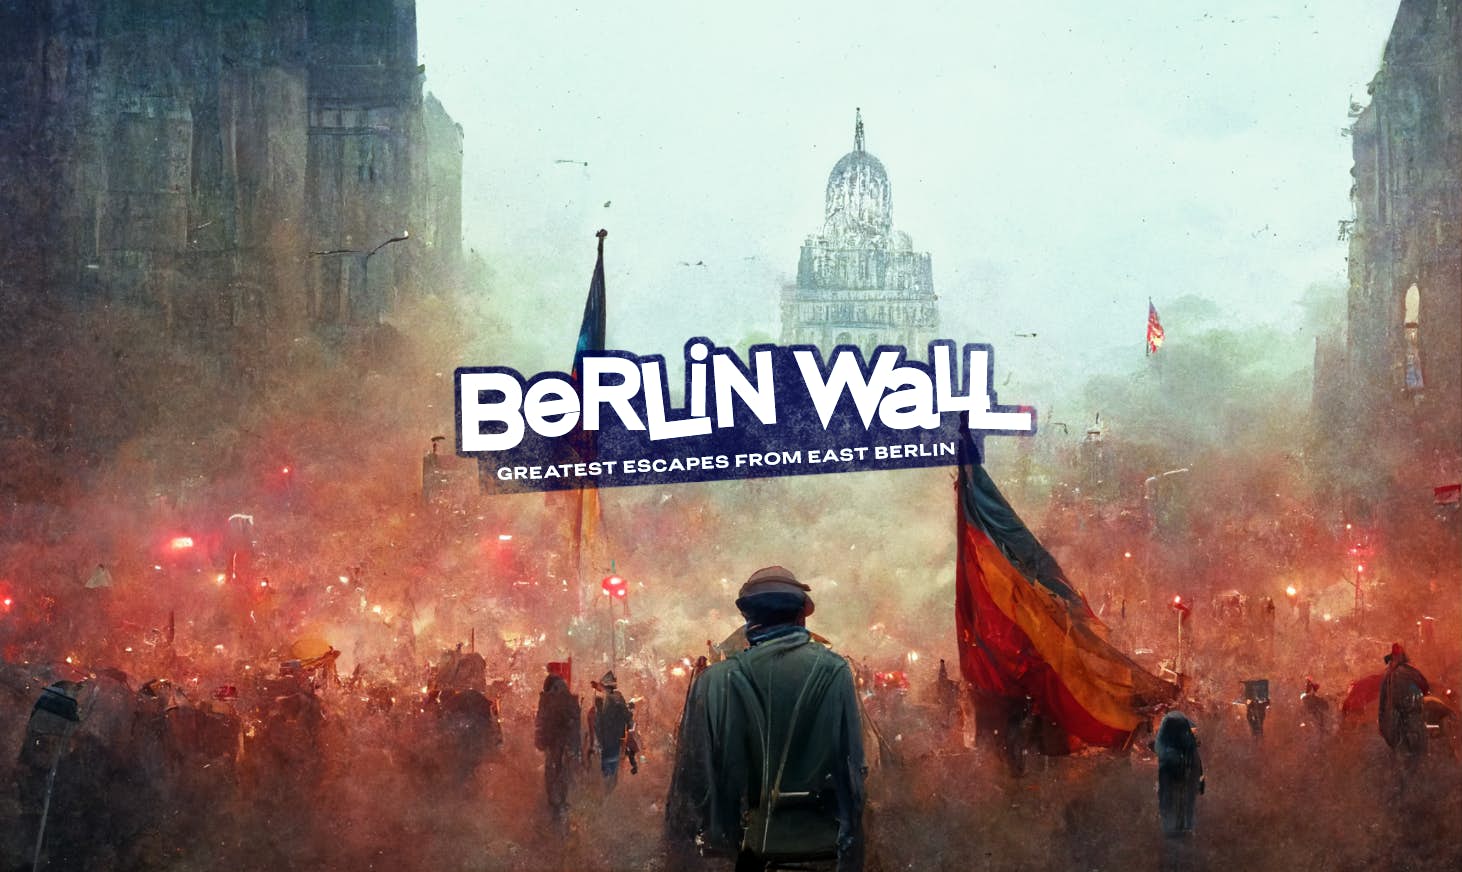 Berlin Wall: Greatest Escapes from East Berlin image